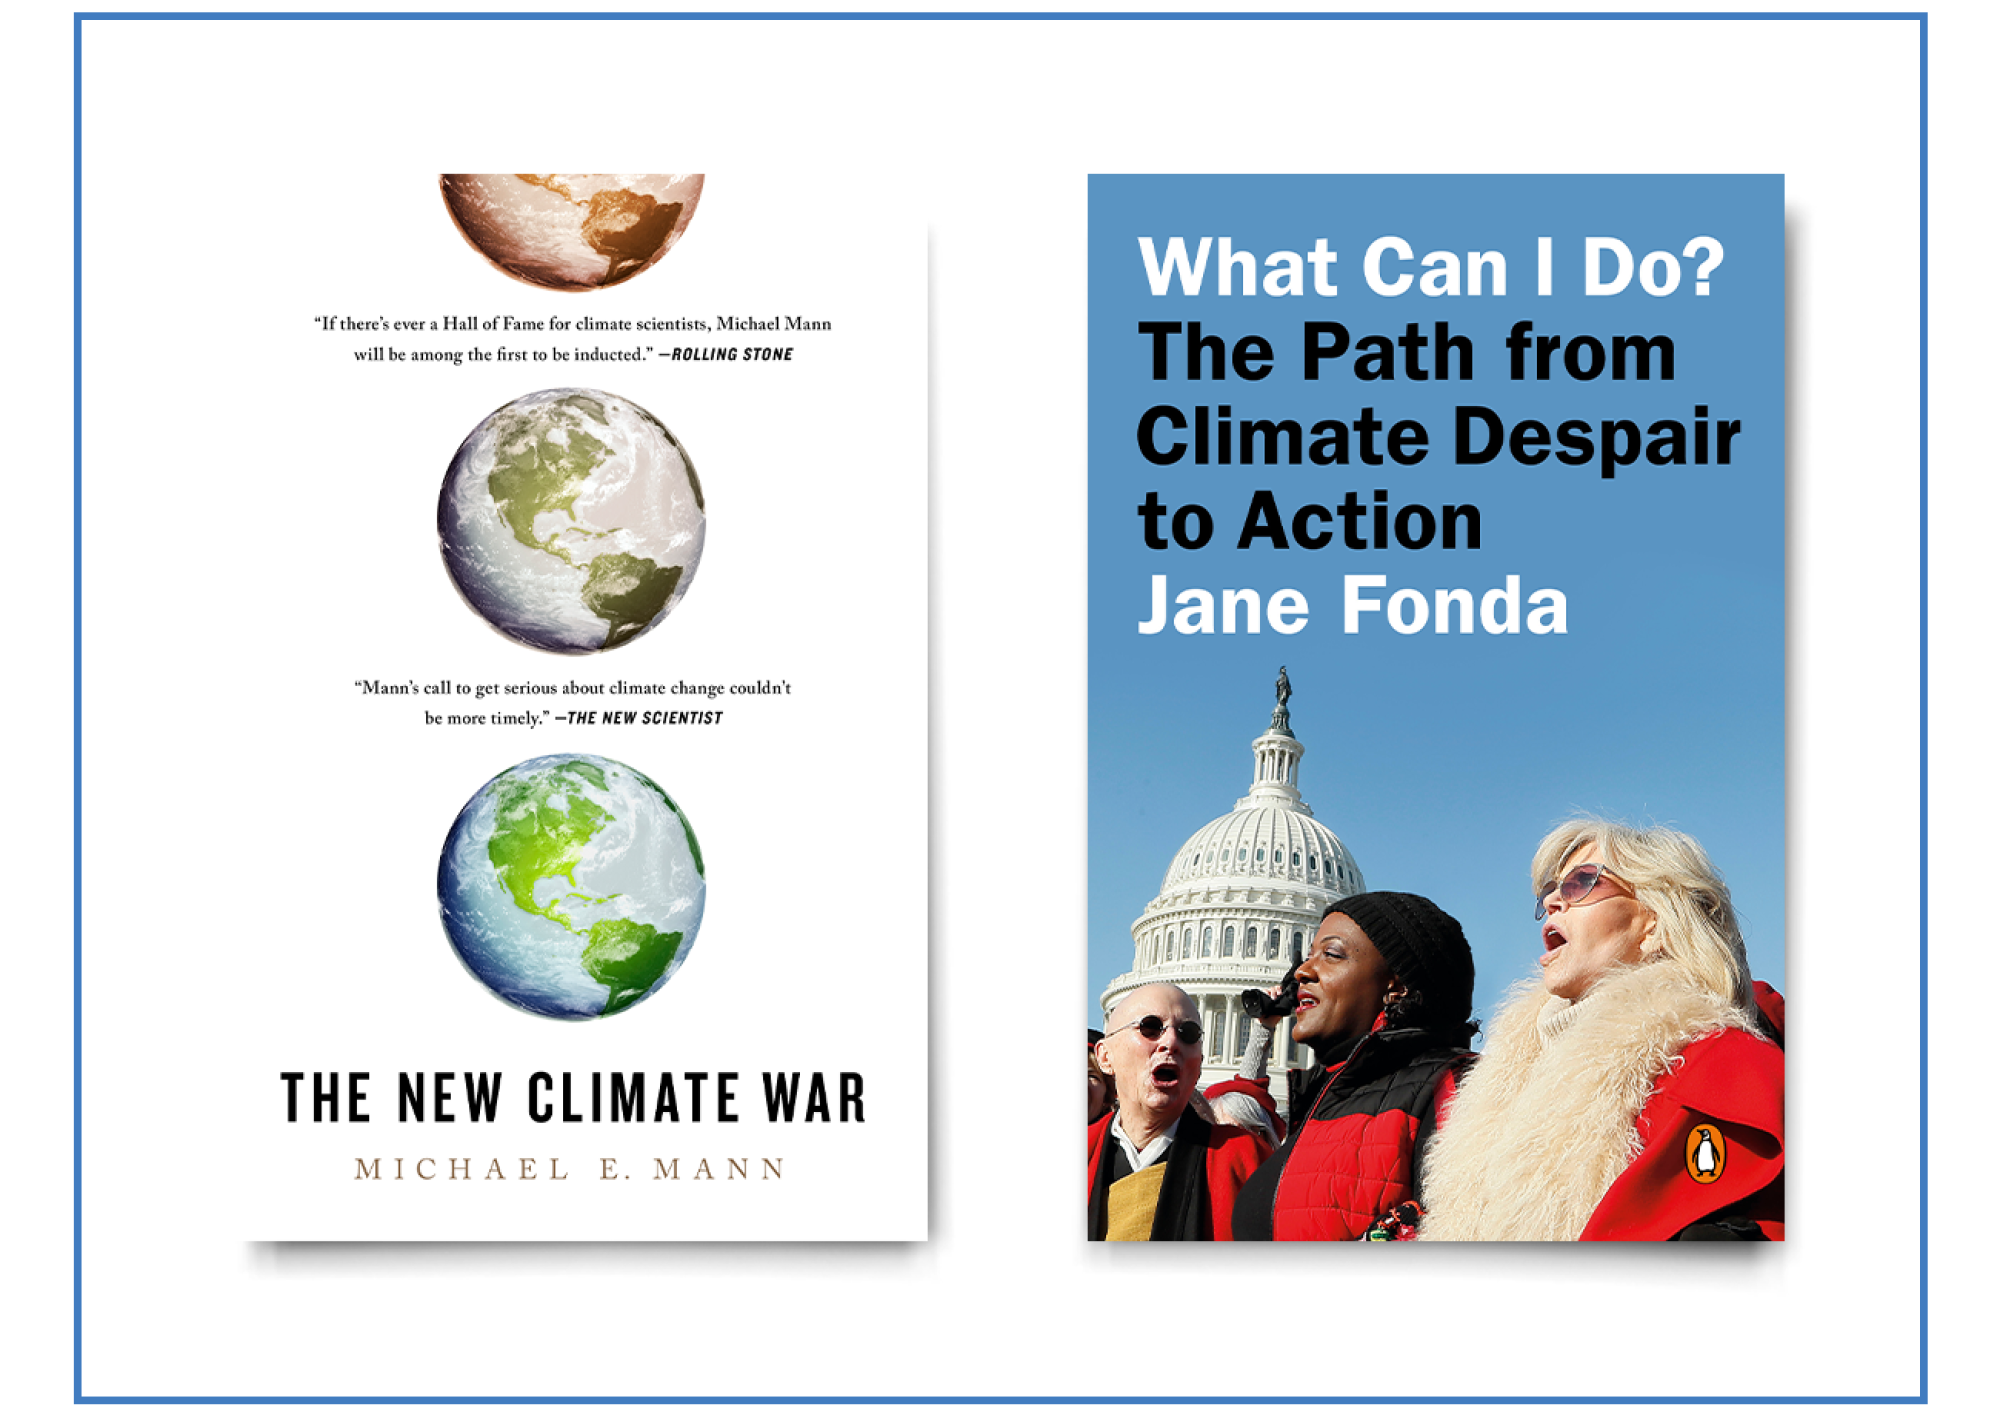 Book covers: "The New Climate War" and "What Can I Do: The Path from Climate Despair to Action"